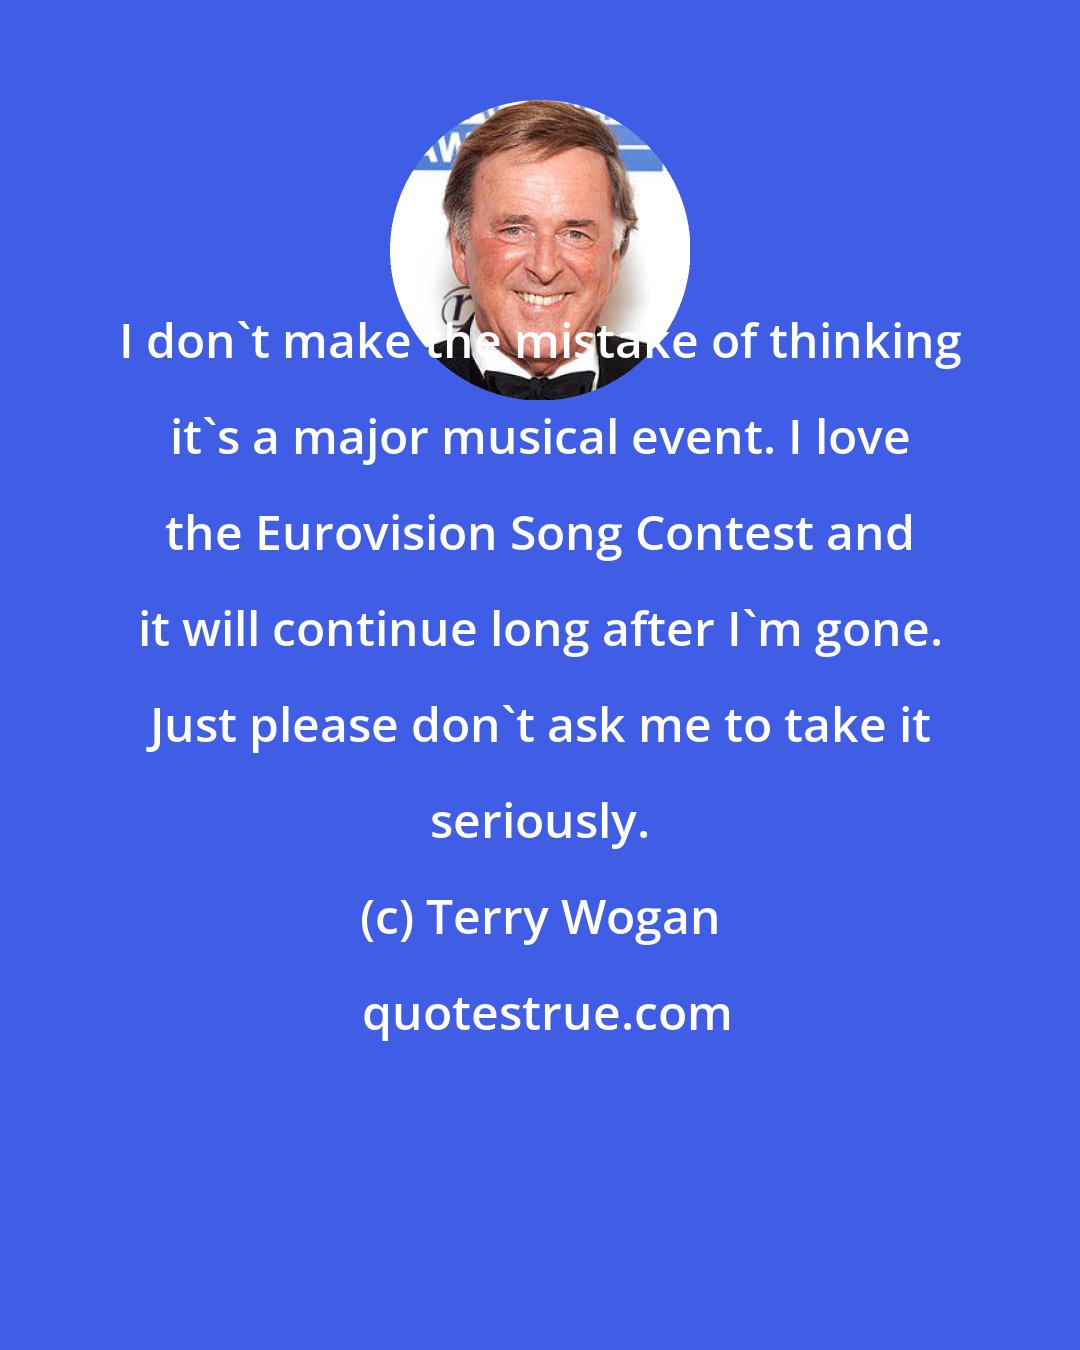 Terry Wogan: I don't make the mistake of thinking it's a major musical event. I love the Eurovision Song Contest and it will continue long after I'm gone. Just please don't ask me to take it seriously.